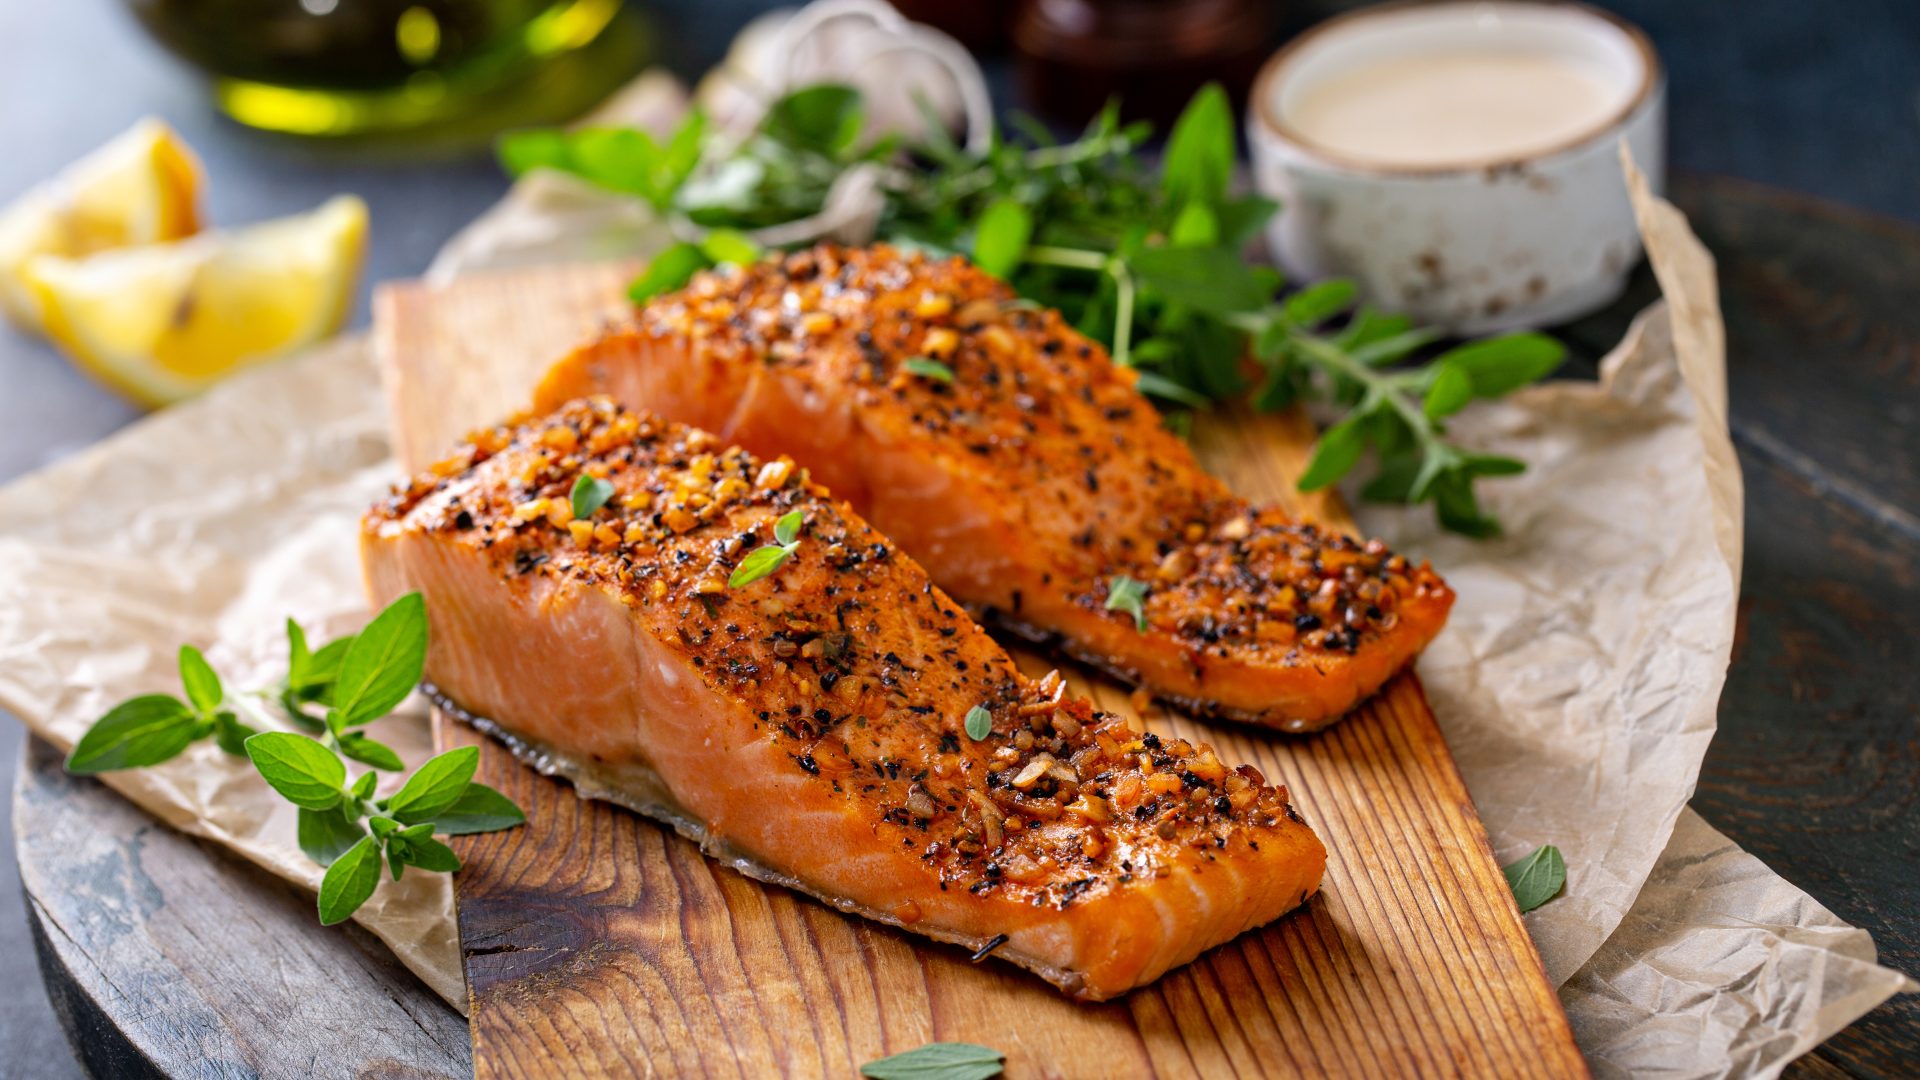 Salmon to reduce muscle soreness